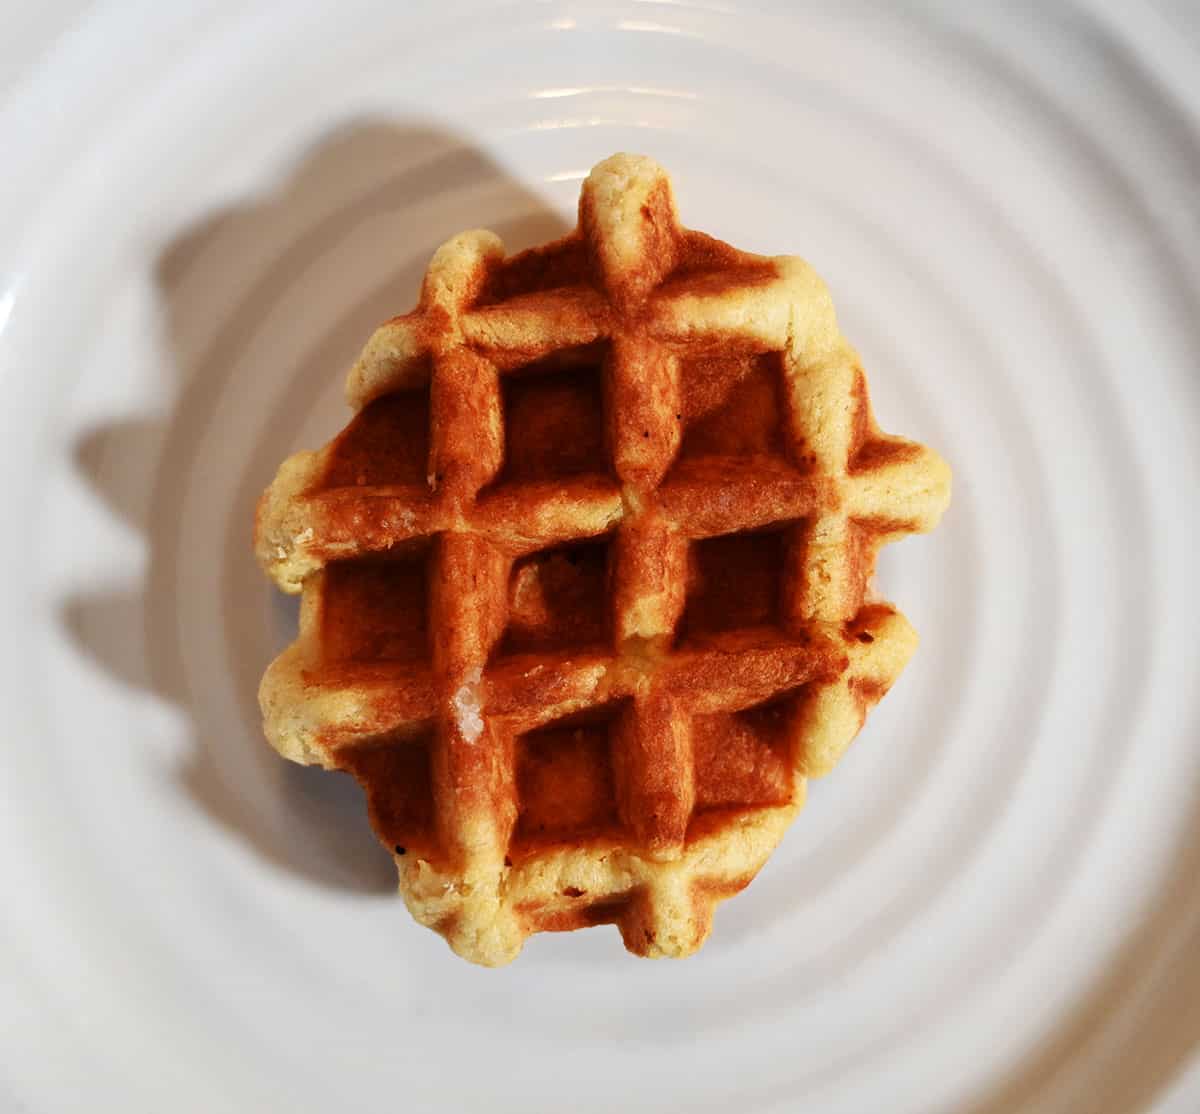 Image of one waffle unpackaged and on a plate.